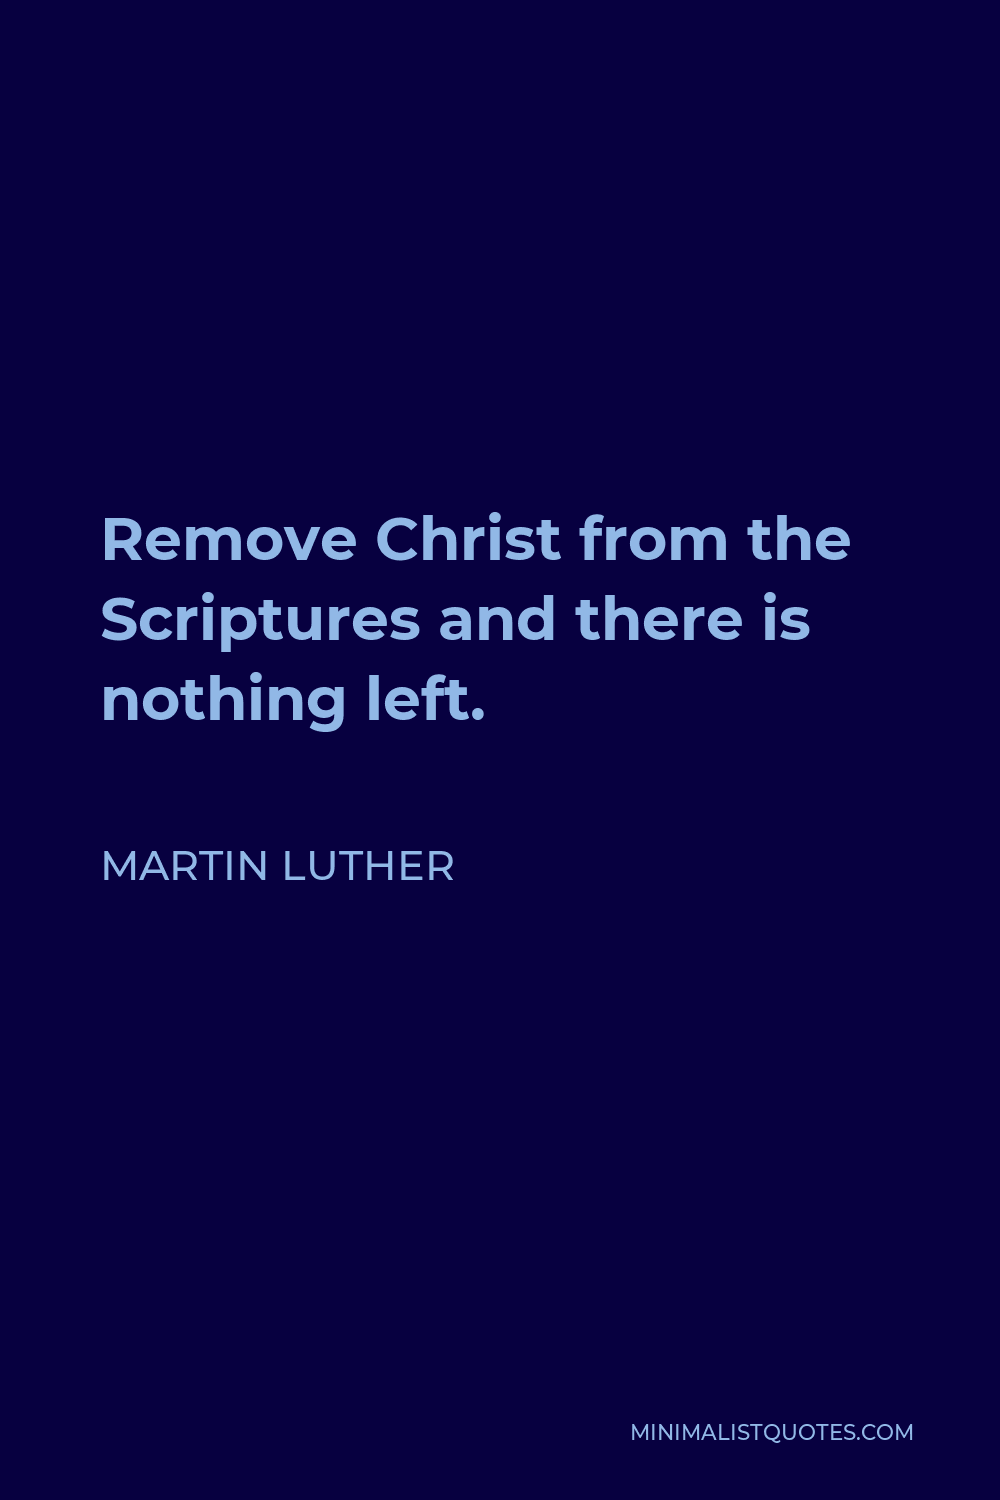 Martin Luther Quote - Remove Christ from the Scriptures and there is nothing left.